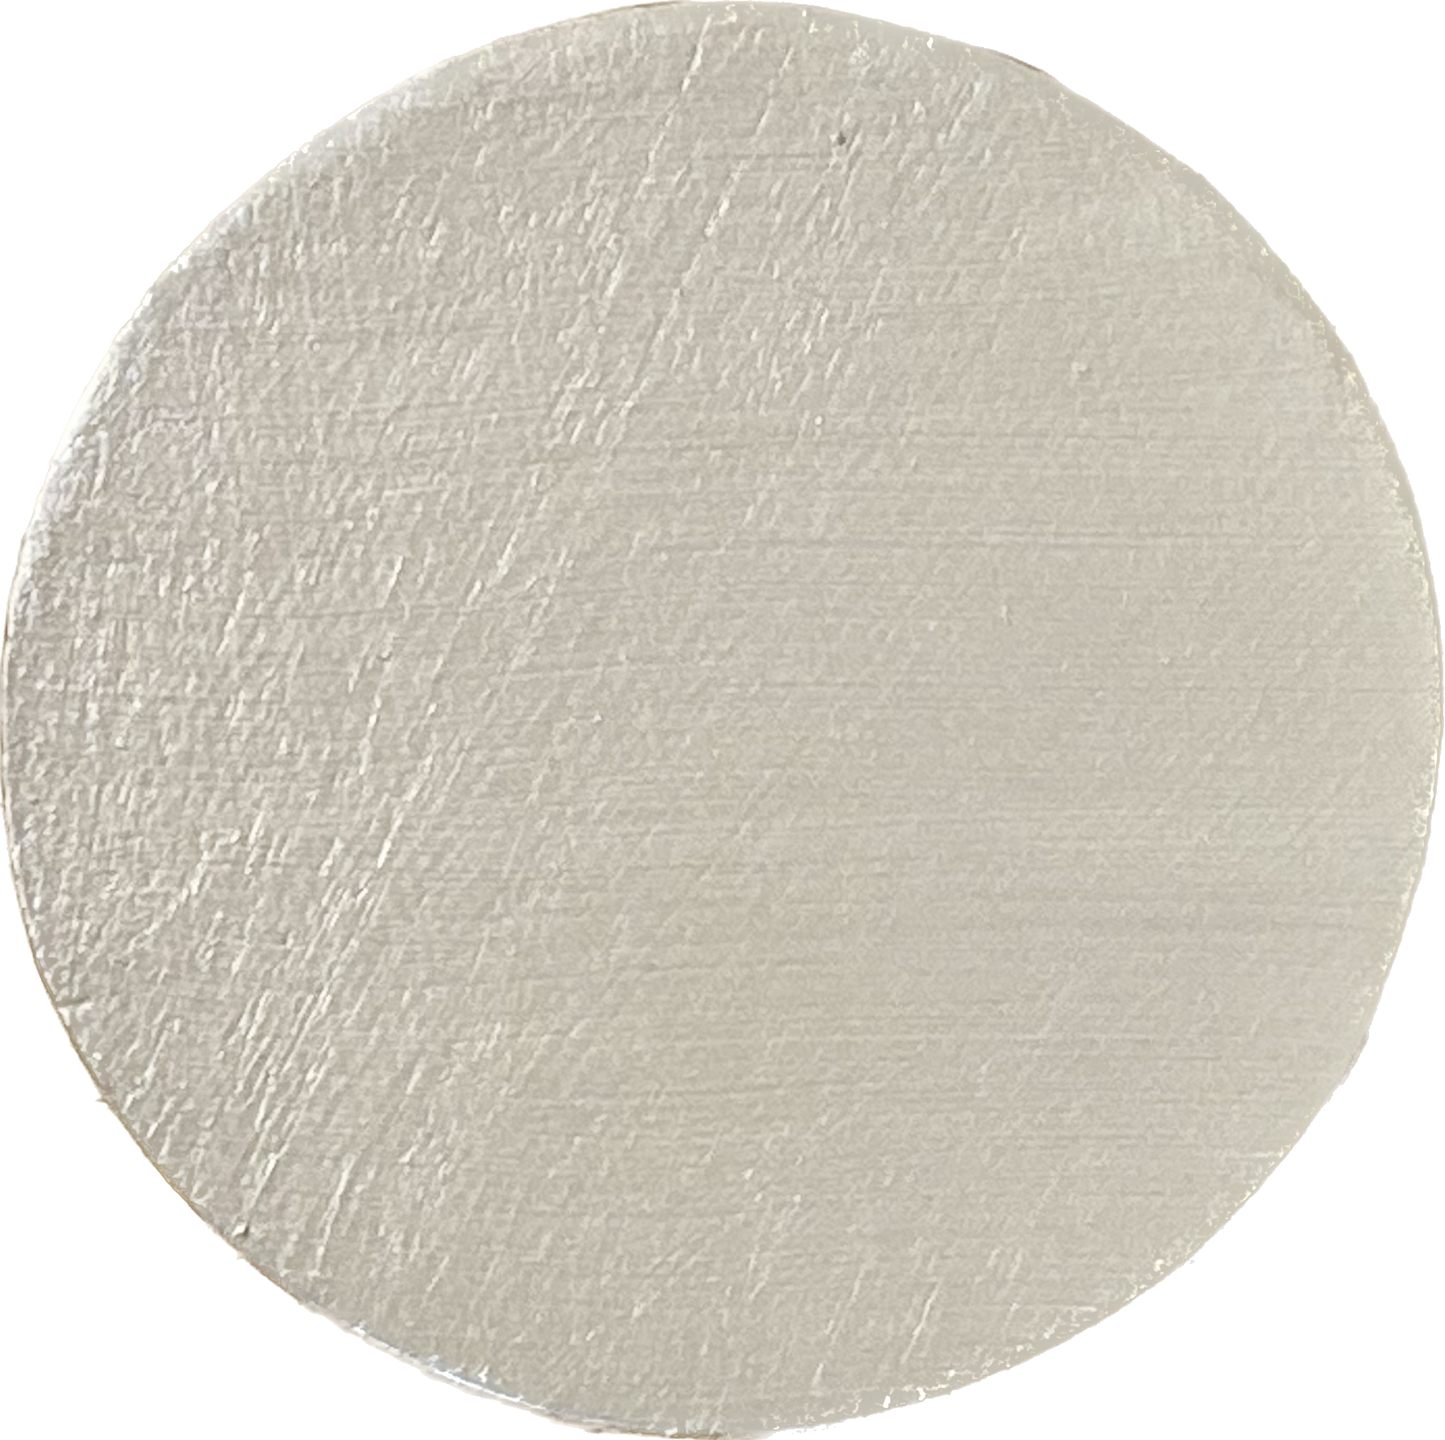 Pearlfect Metallic Paint by Hewbury Paint® - PALE CHAMPAGNE